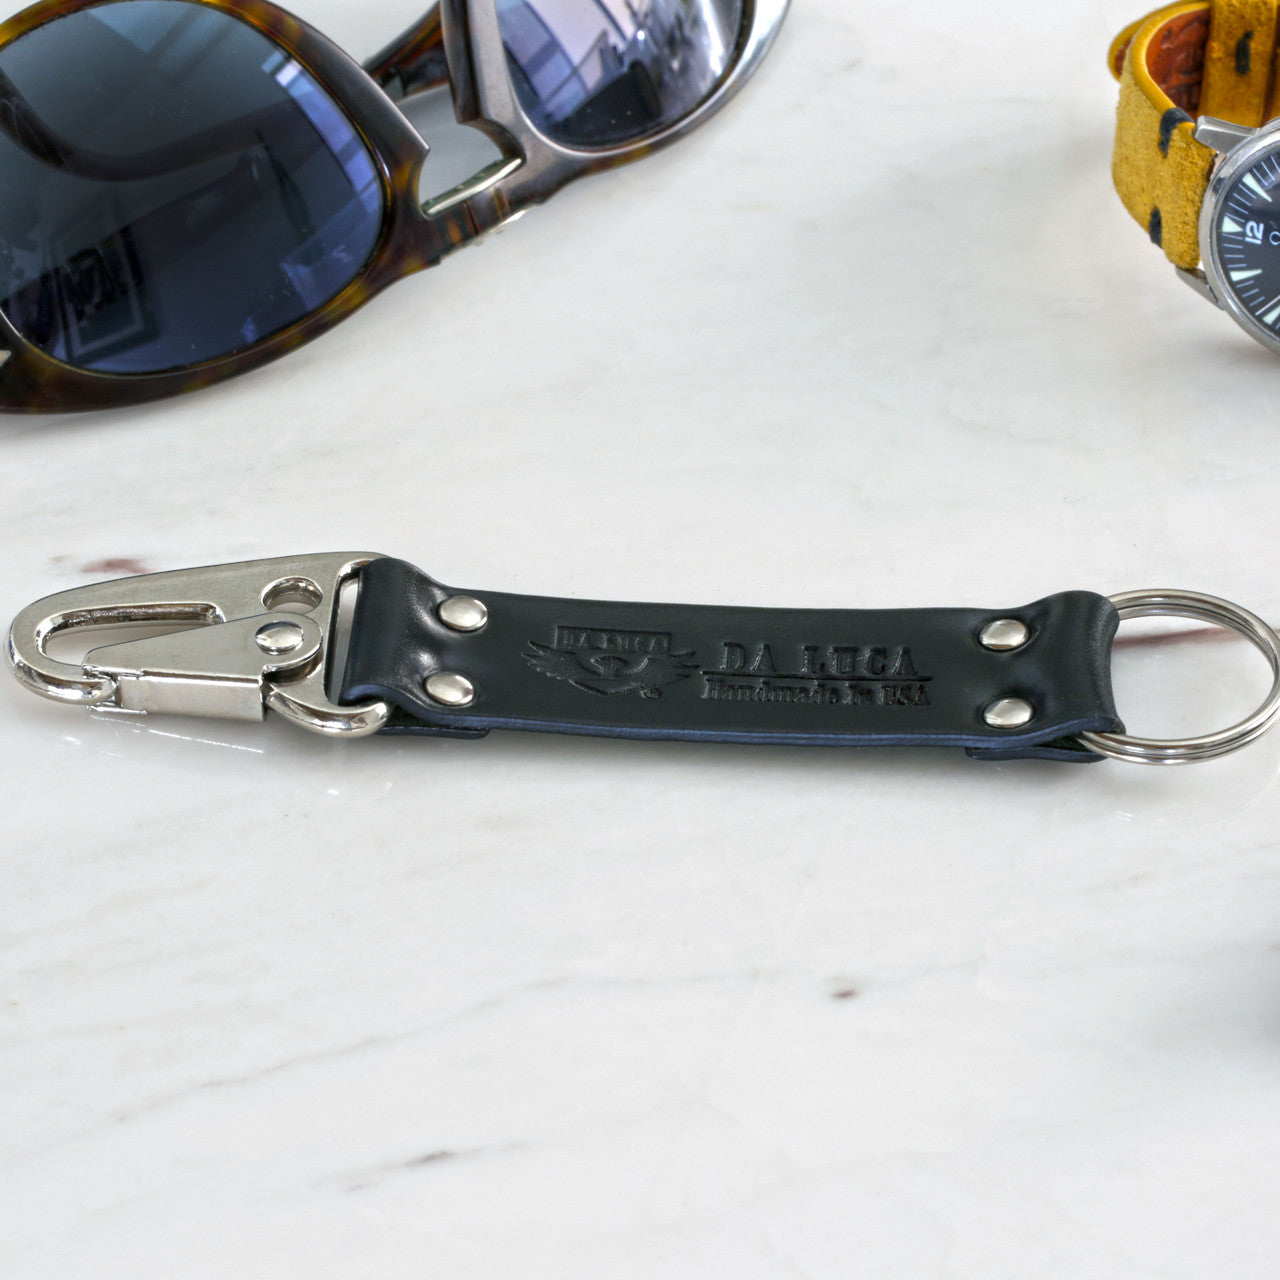 Close View Of Our Keychain Made From Genuine Horween Black Shell Cordovan Leather and Polished Hardware by DaLuca Straps.